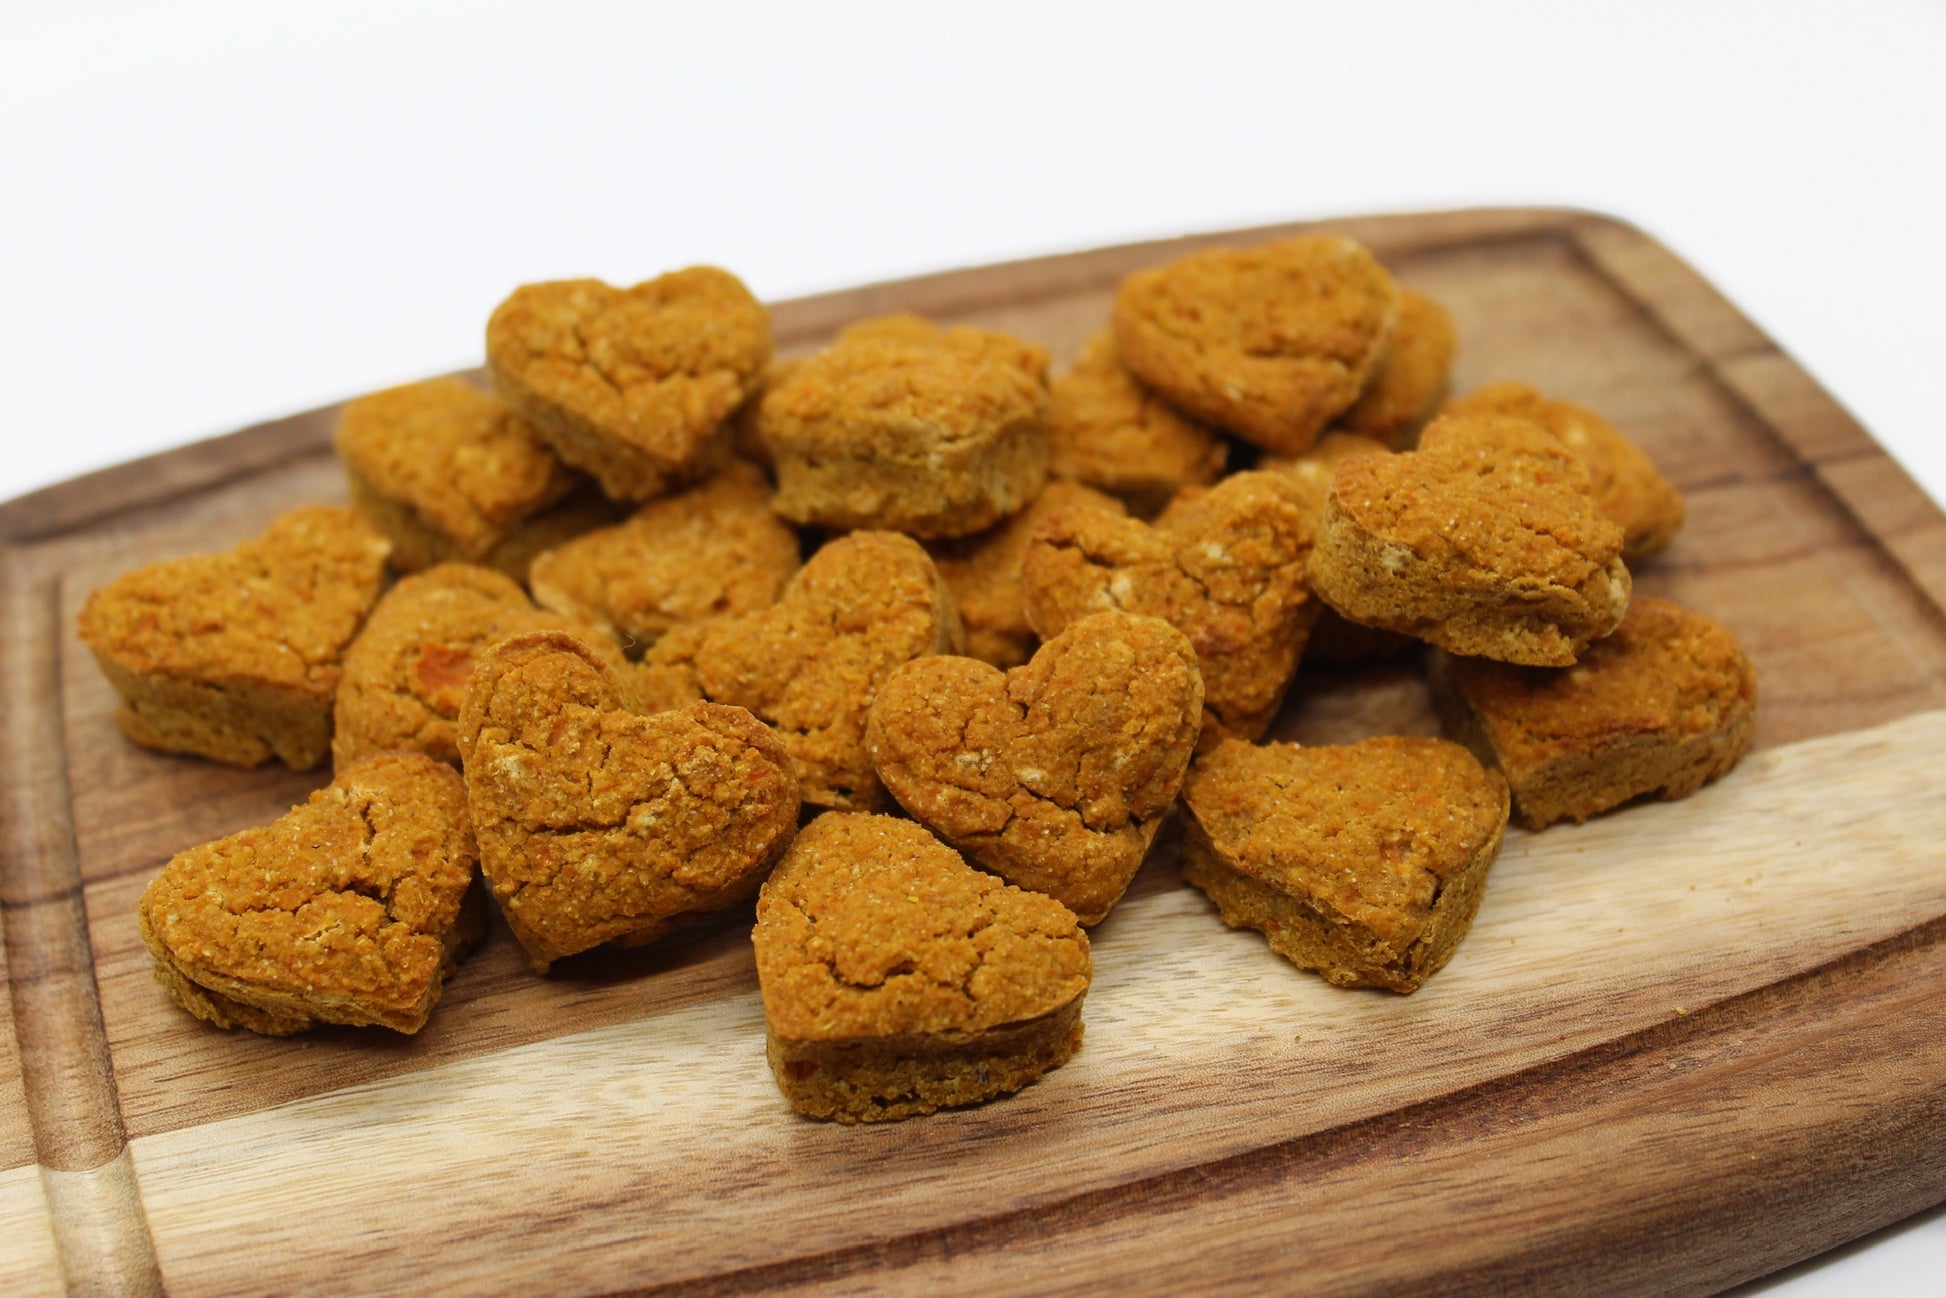 A group of bite-sized, heart-shaped training treats in sweet potato and carrot flavor displayed on a wood cutting board.